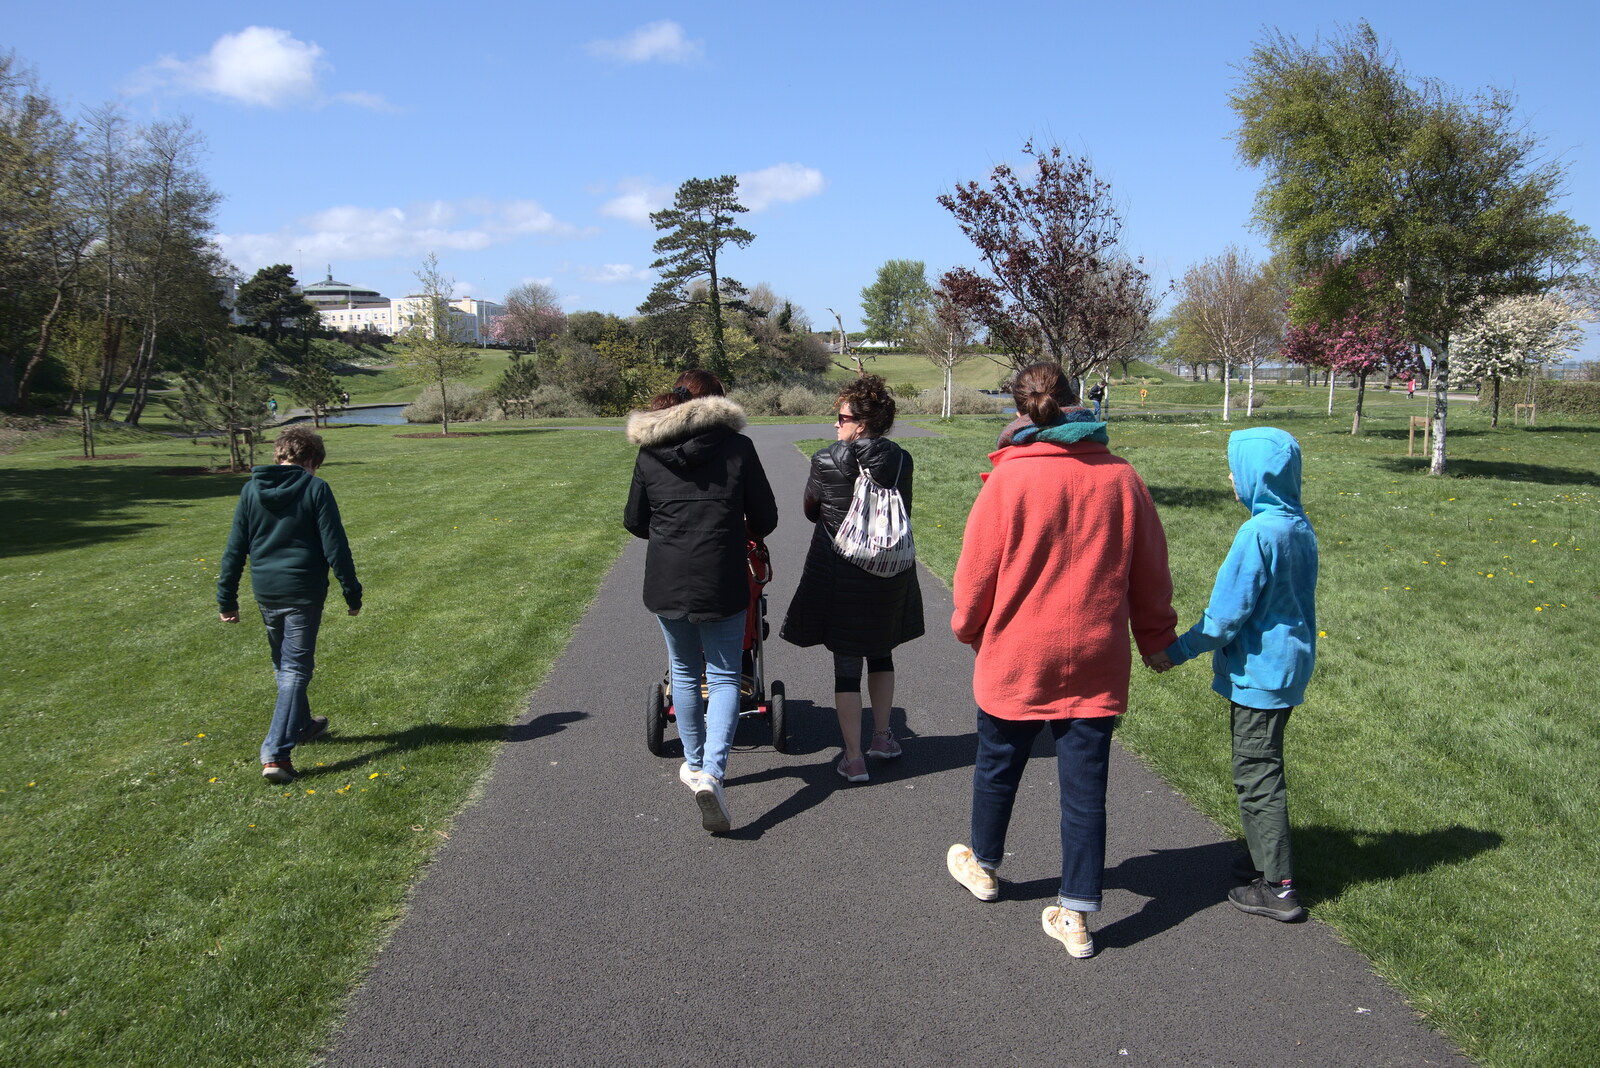 Blackrock North and South, Louth and County Dublin, Ireland - 23rd April 2022: We walk around the park